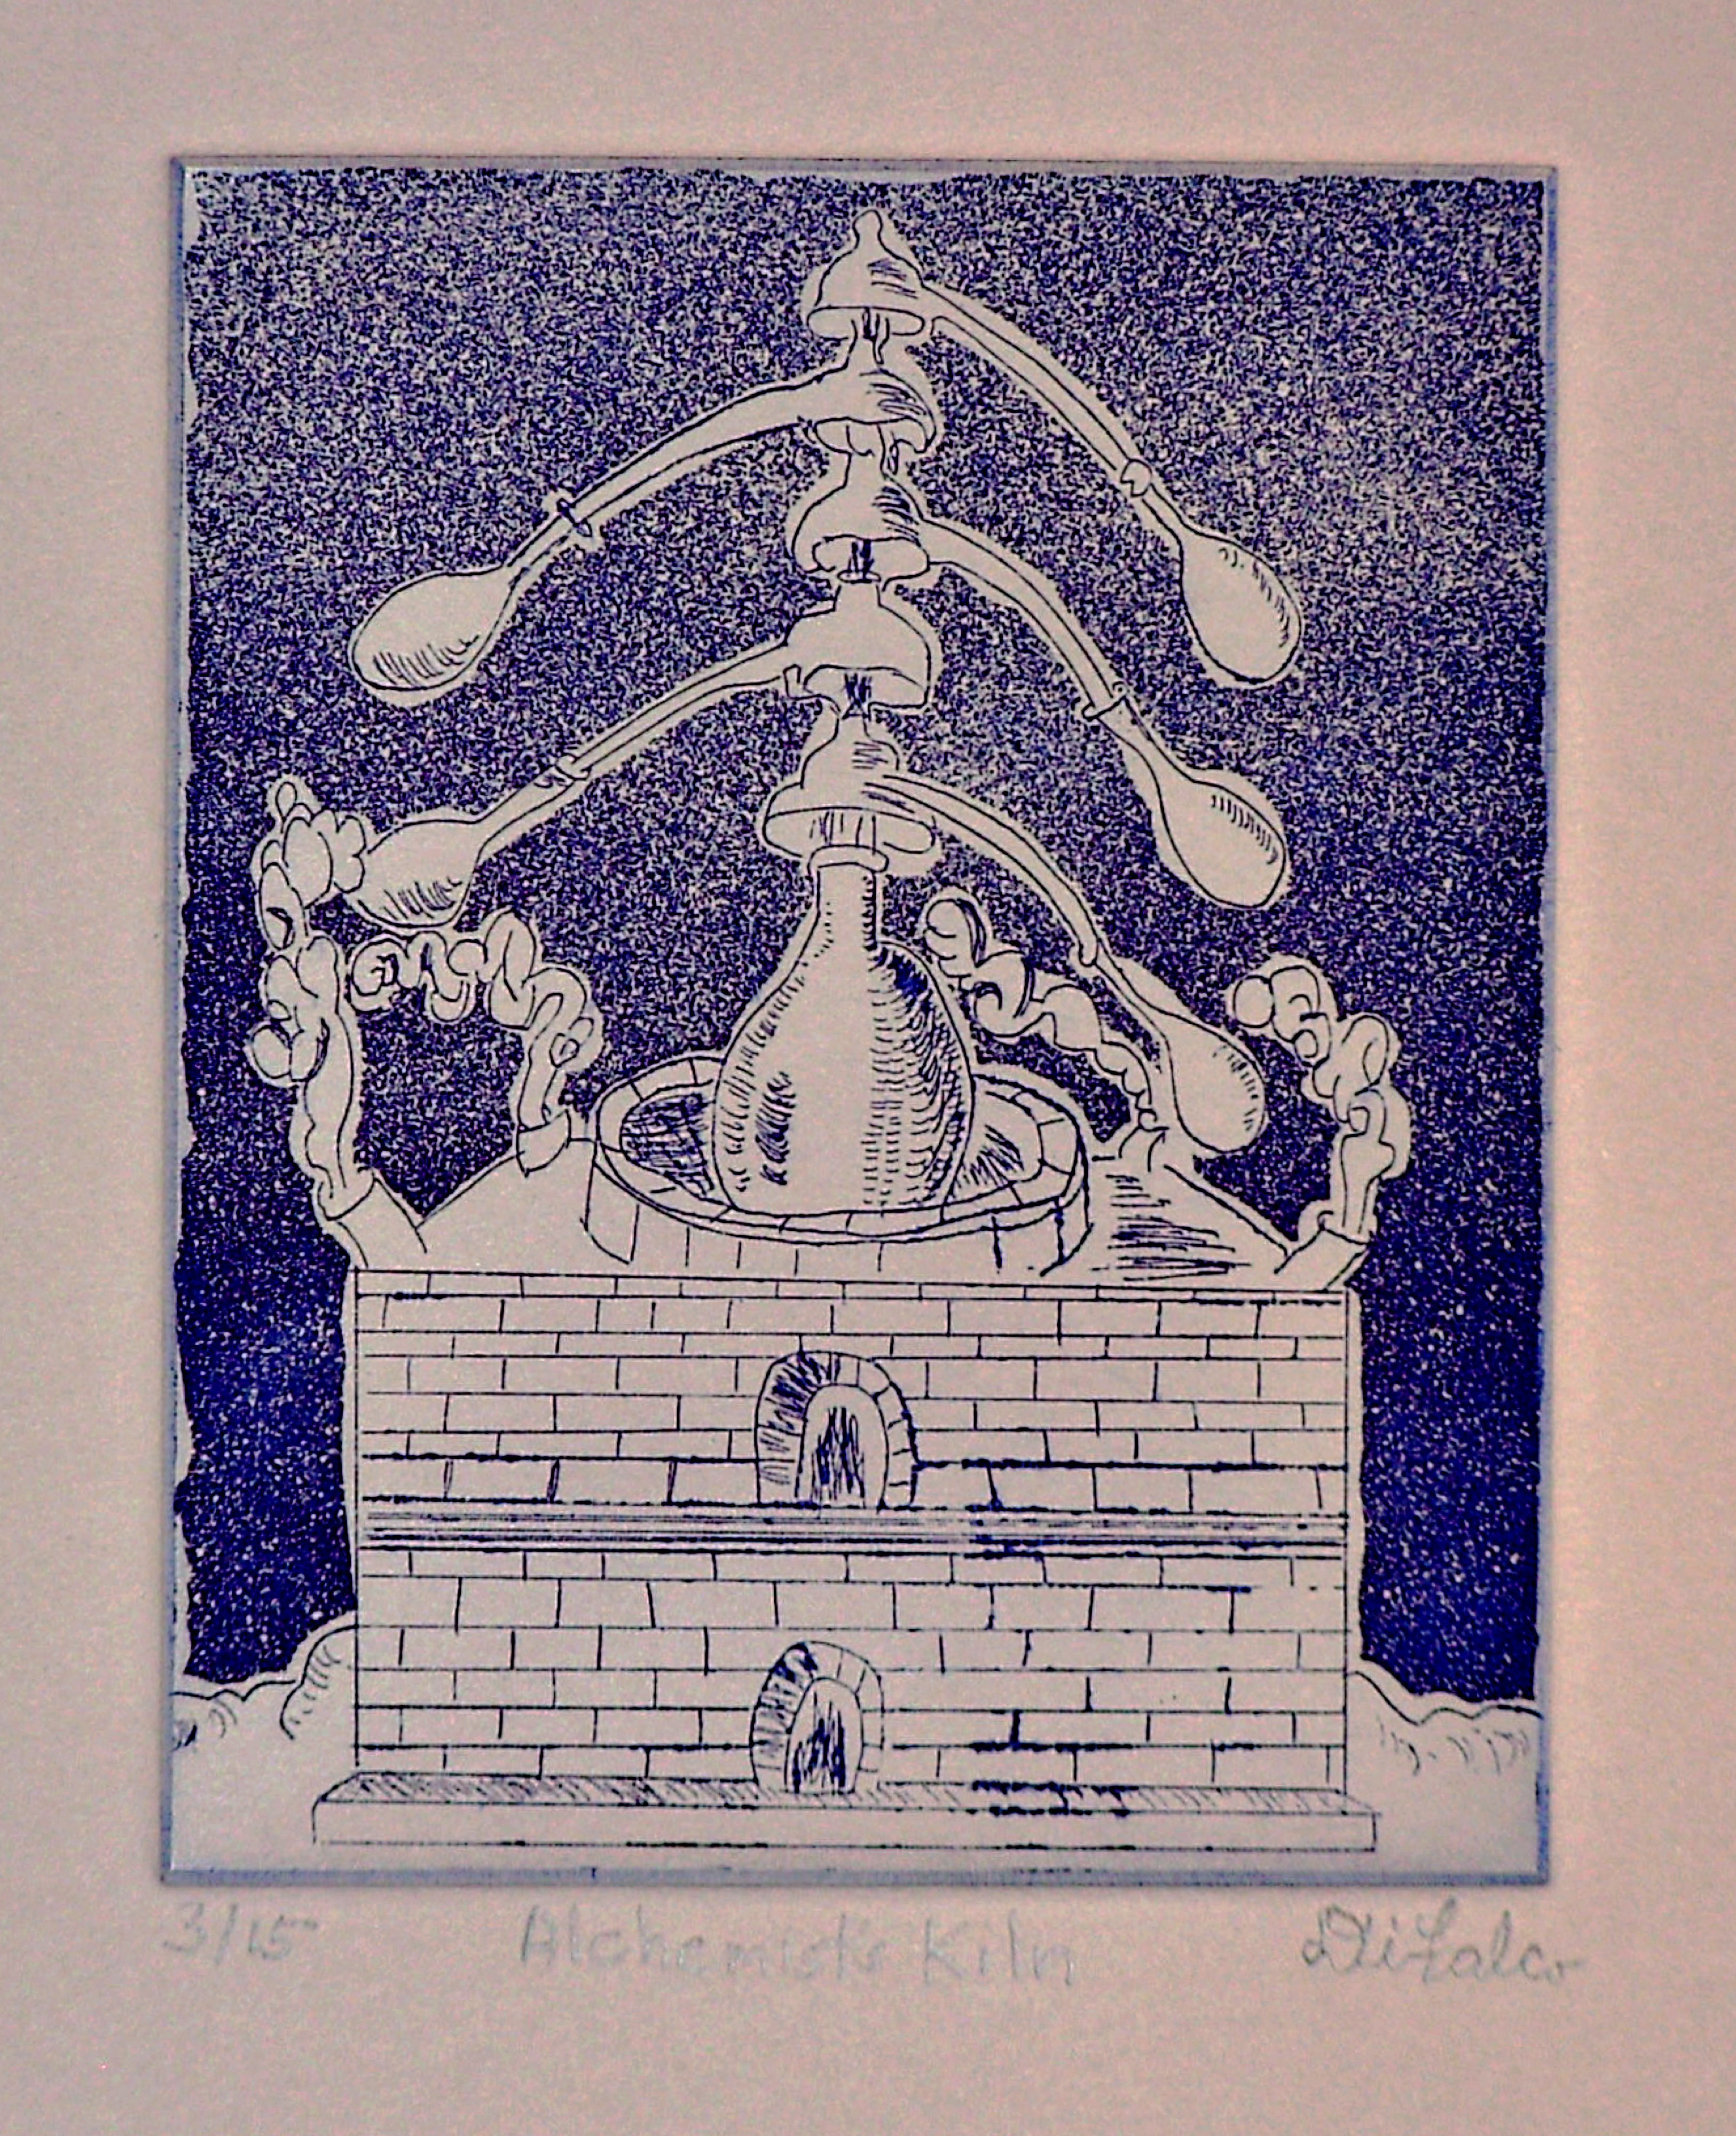 Jerry  Di Falco, 'Kiln Of The Alchemist', 2010, original Printmaking Intaglio, 8 x 10  x 0.5 inches. Artwork description: 15375 This etching used the studio techniques of intaglio, dry point, and aquatint. It is executed using a hand blended color of oil base etching inks, all Charbonnel brand from Paris, on Italian mould made grey paper called Magnani Pescia, which is from the town of Cartiera Magnani ...